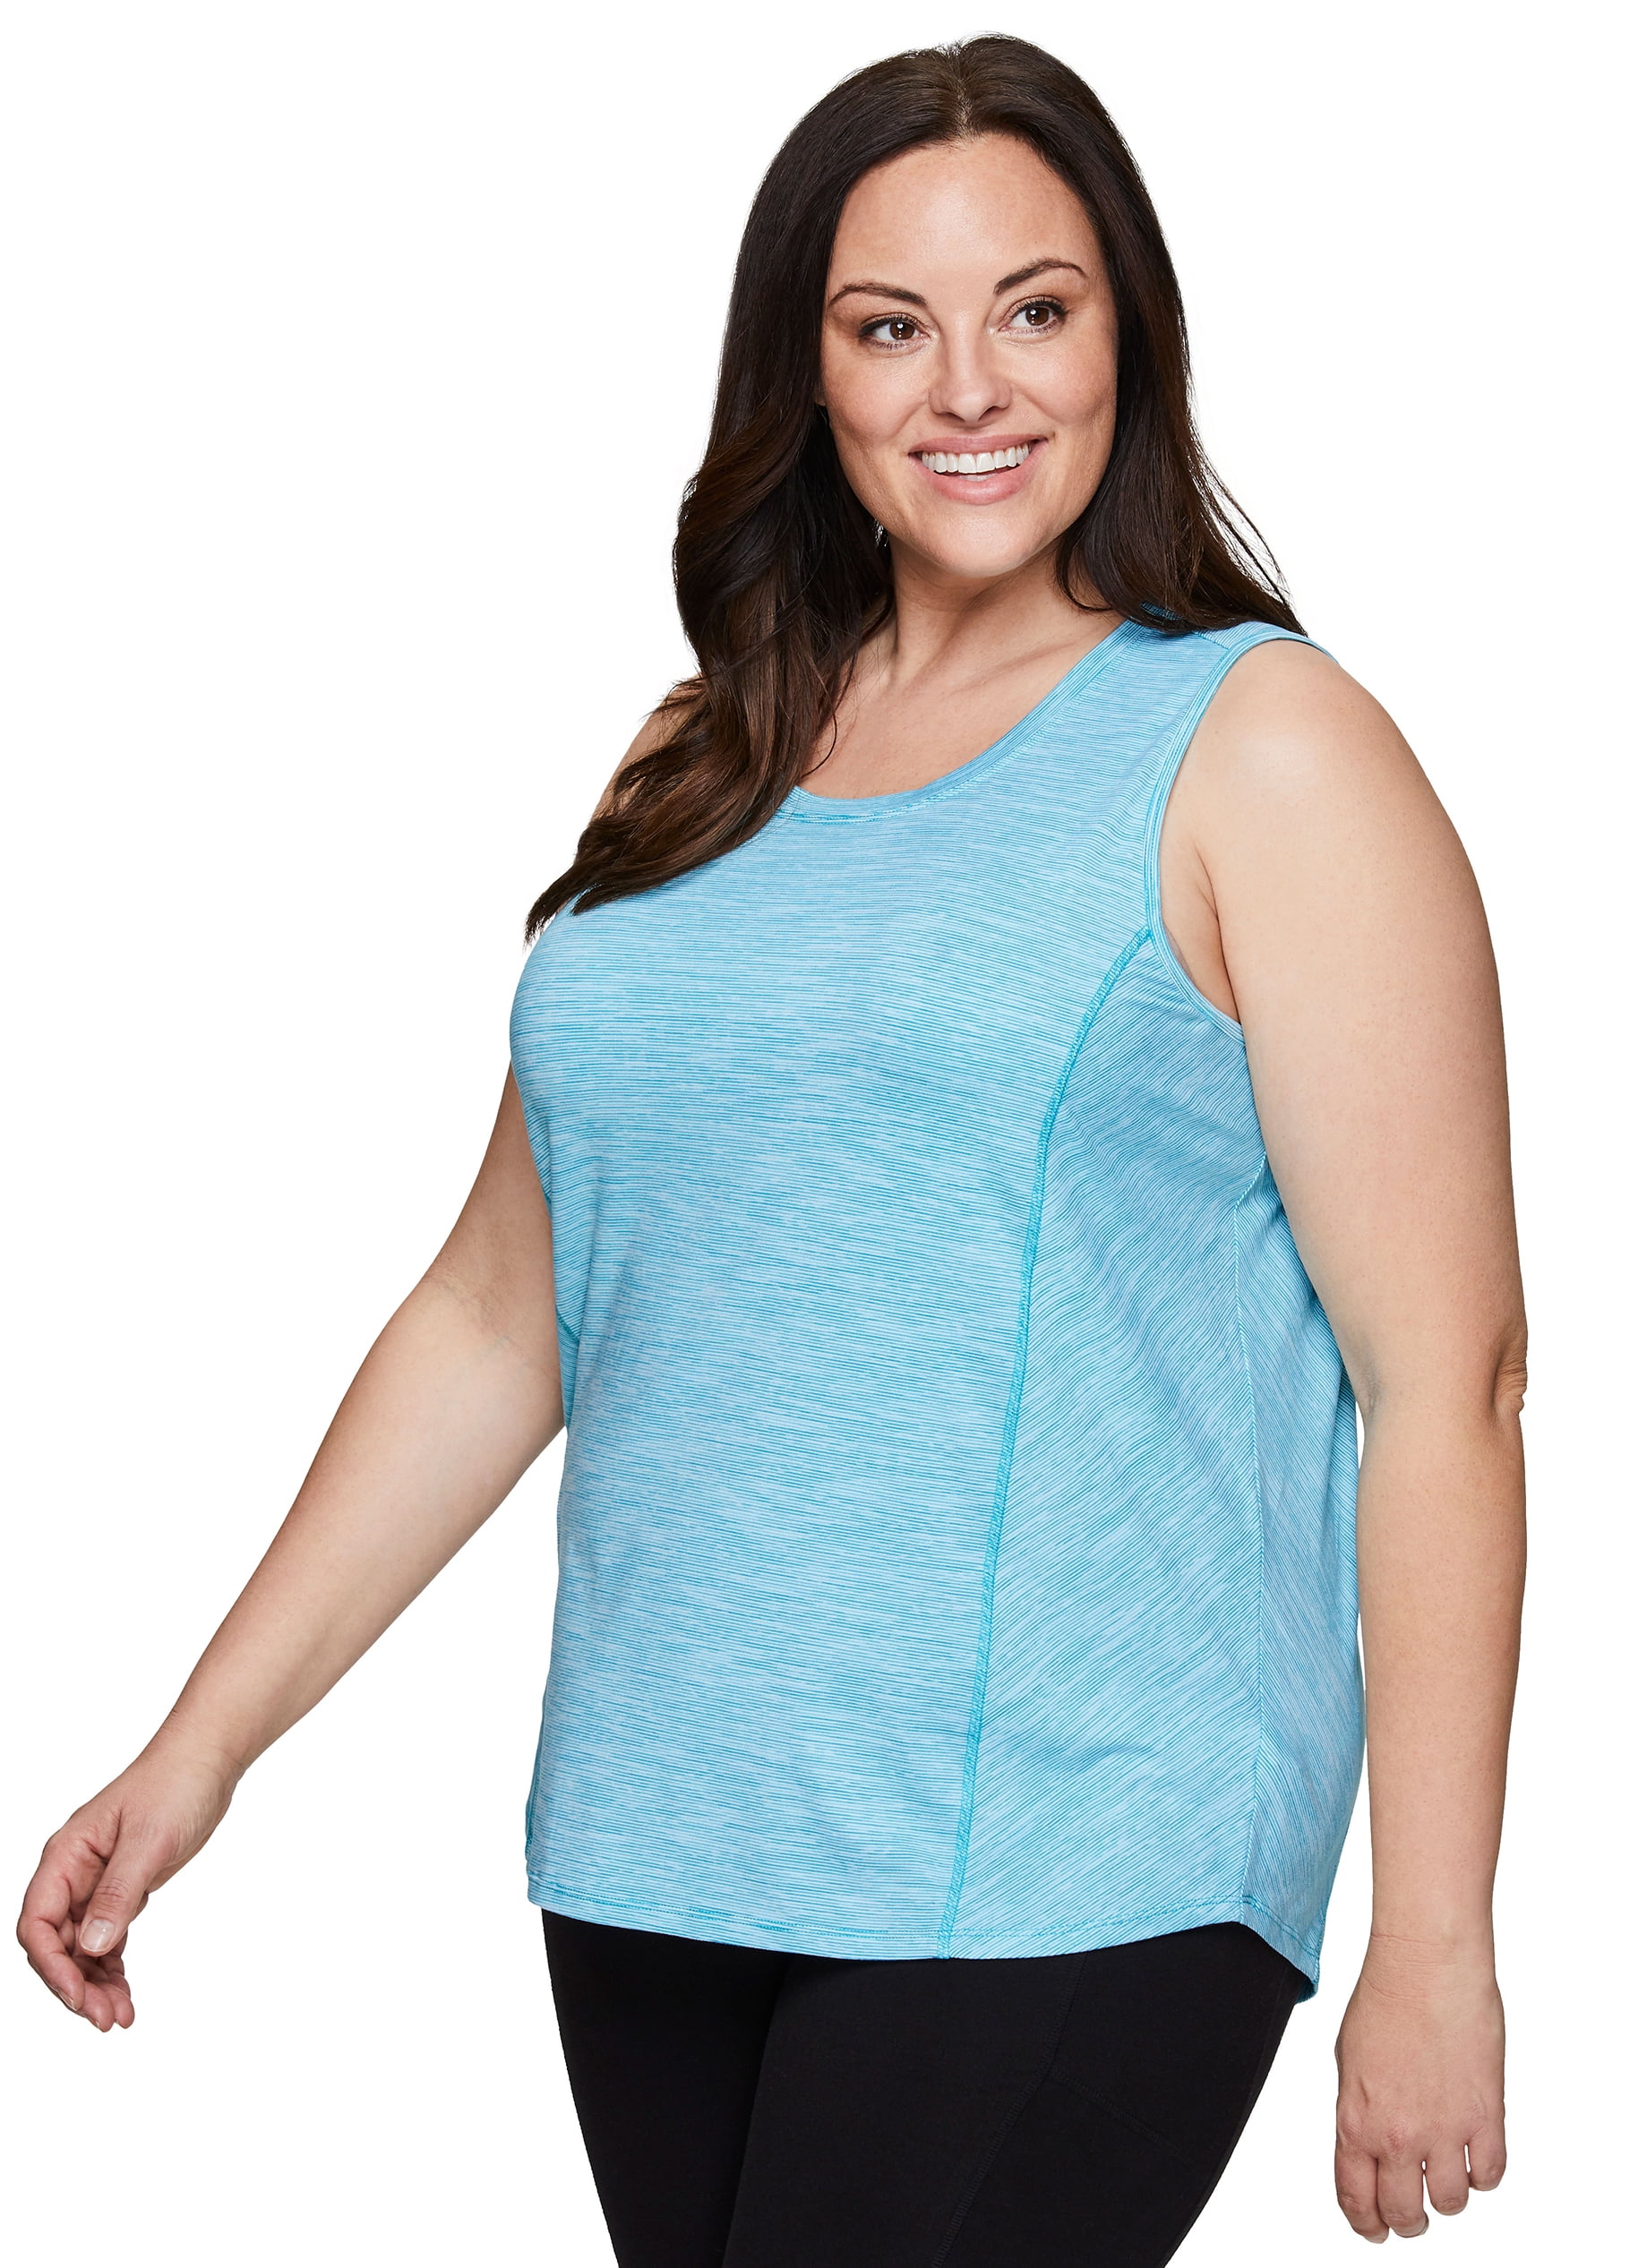 RBX Women's Plus Size Yoga Tank Soft Relaxed Fit Workout Tank Top